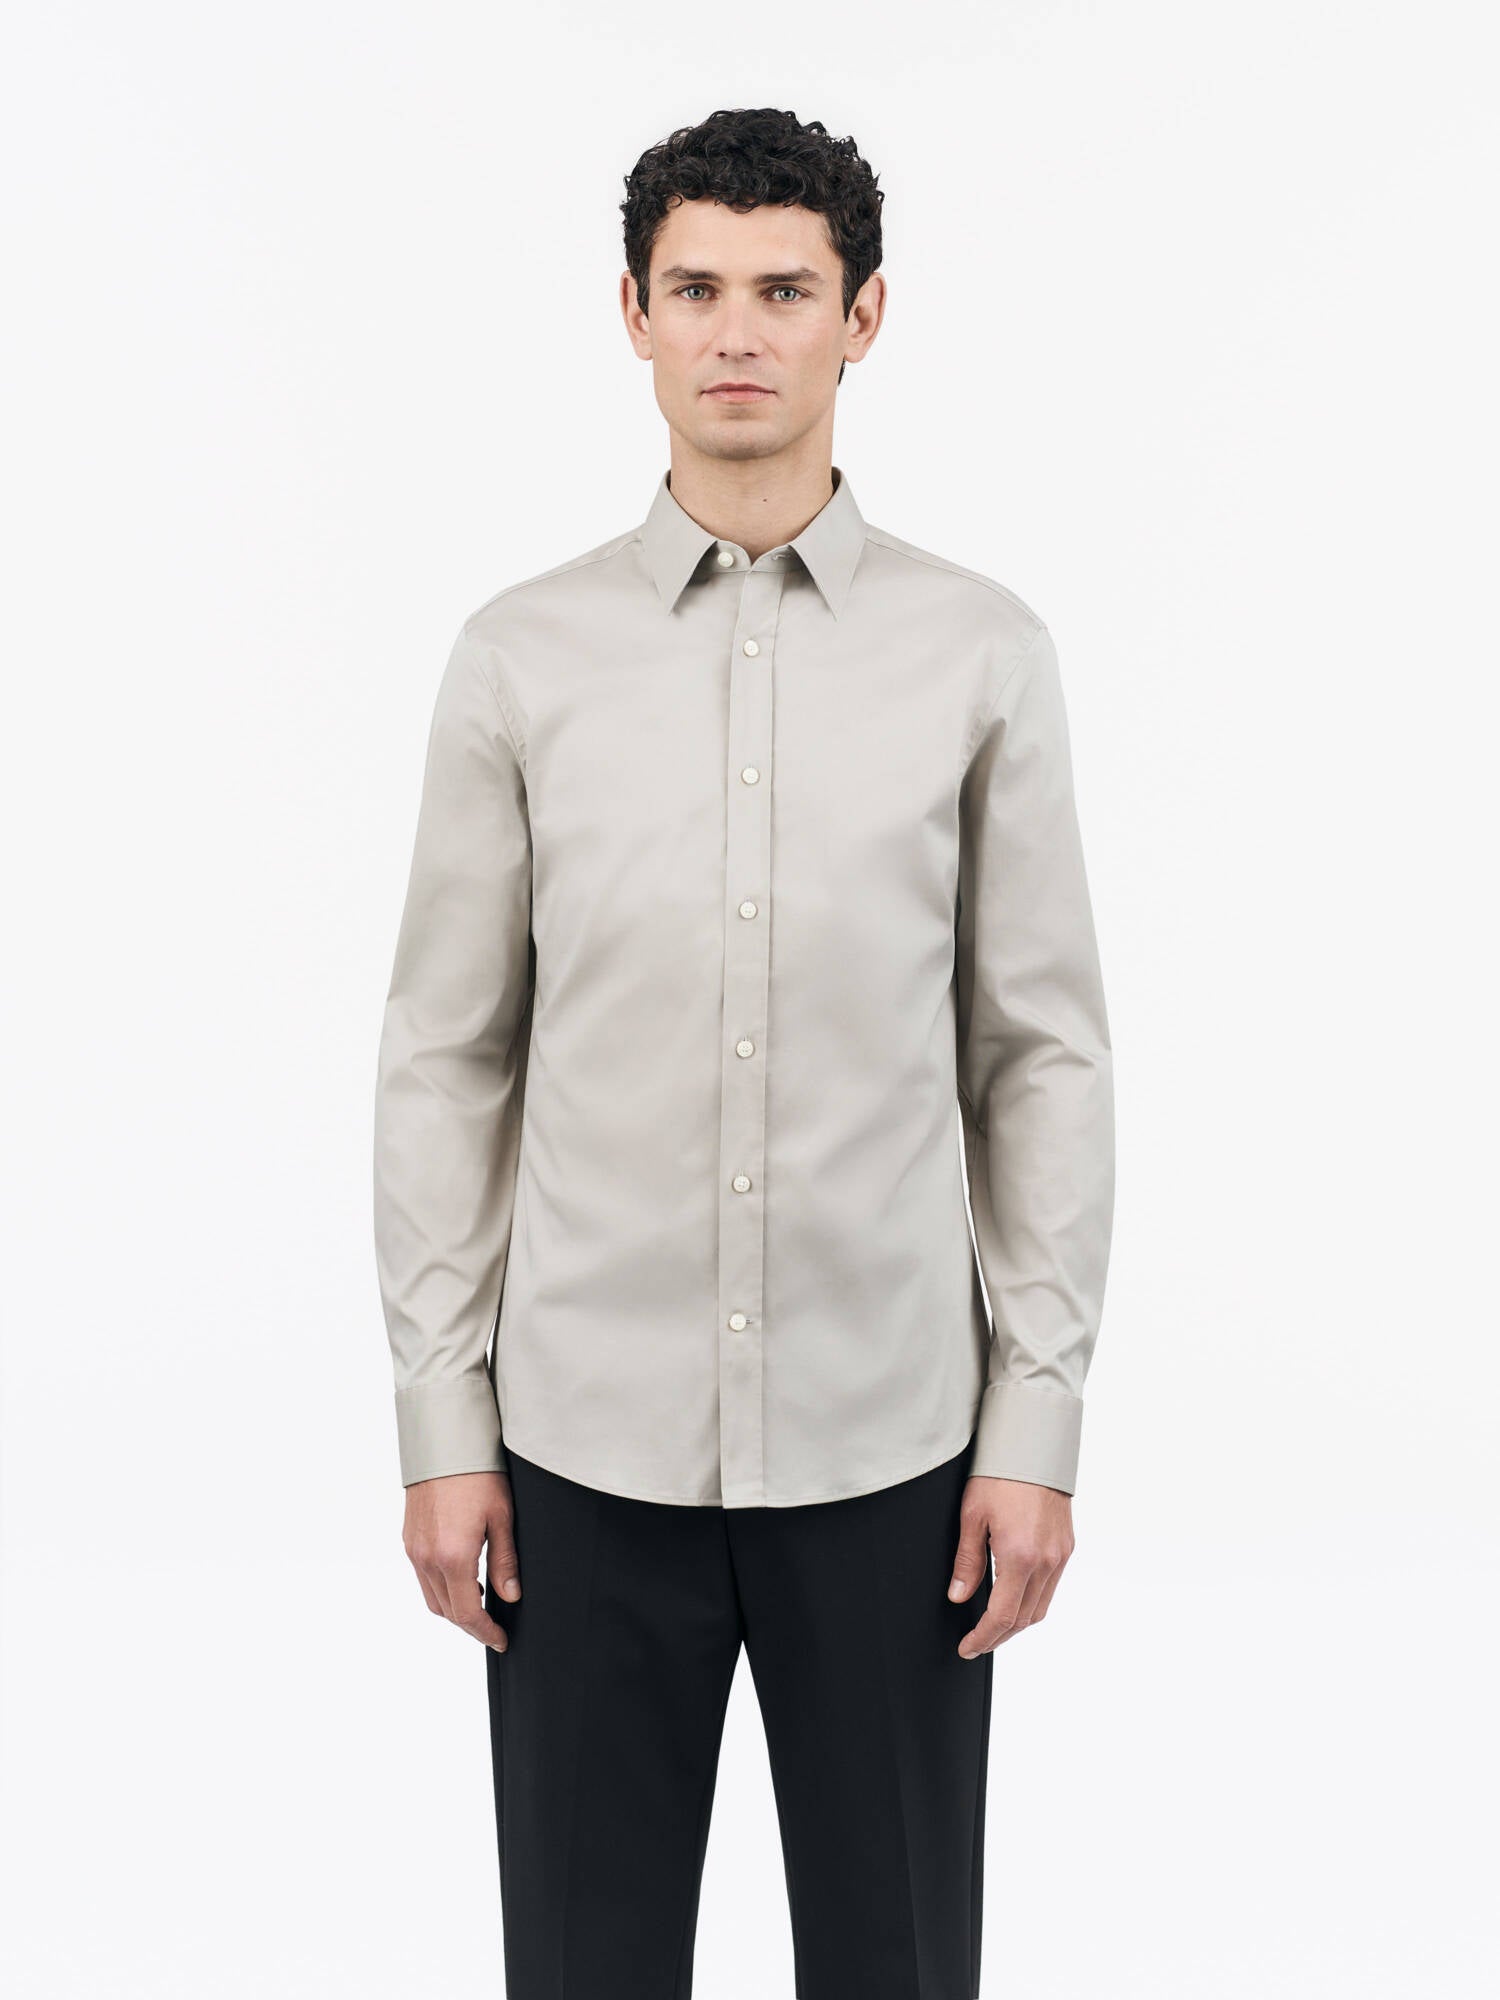 TIGER OF SWEDEN Adley Shirt in Light Grey T68997045| eightywingold 